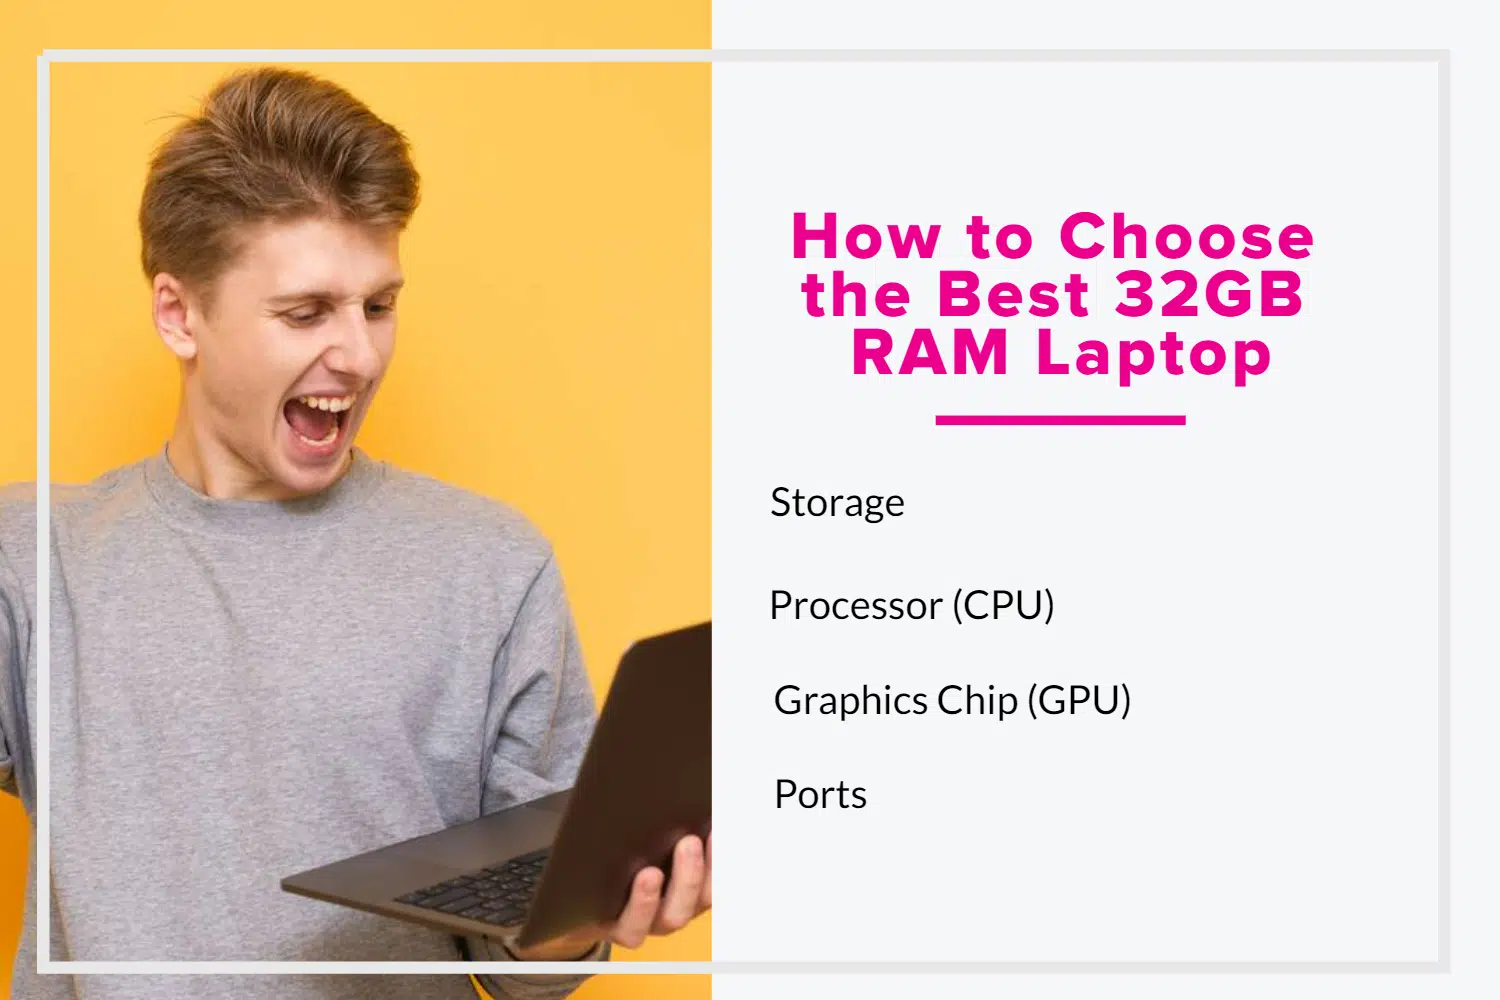 How to Choose the Best 32GB RAM Laptop (1)